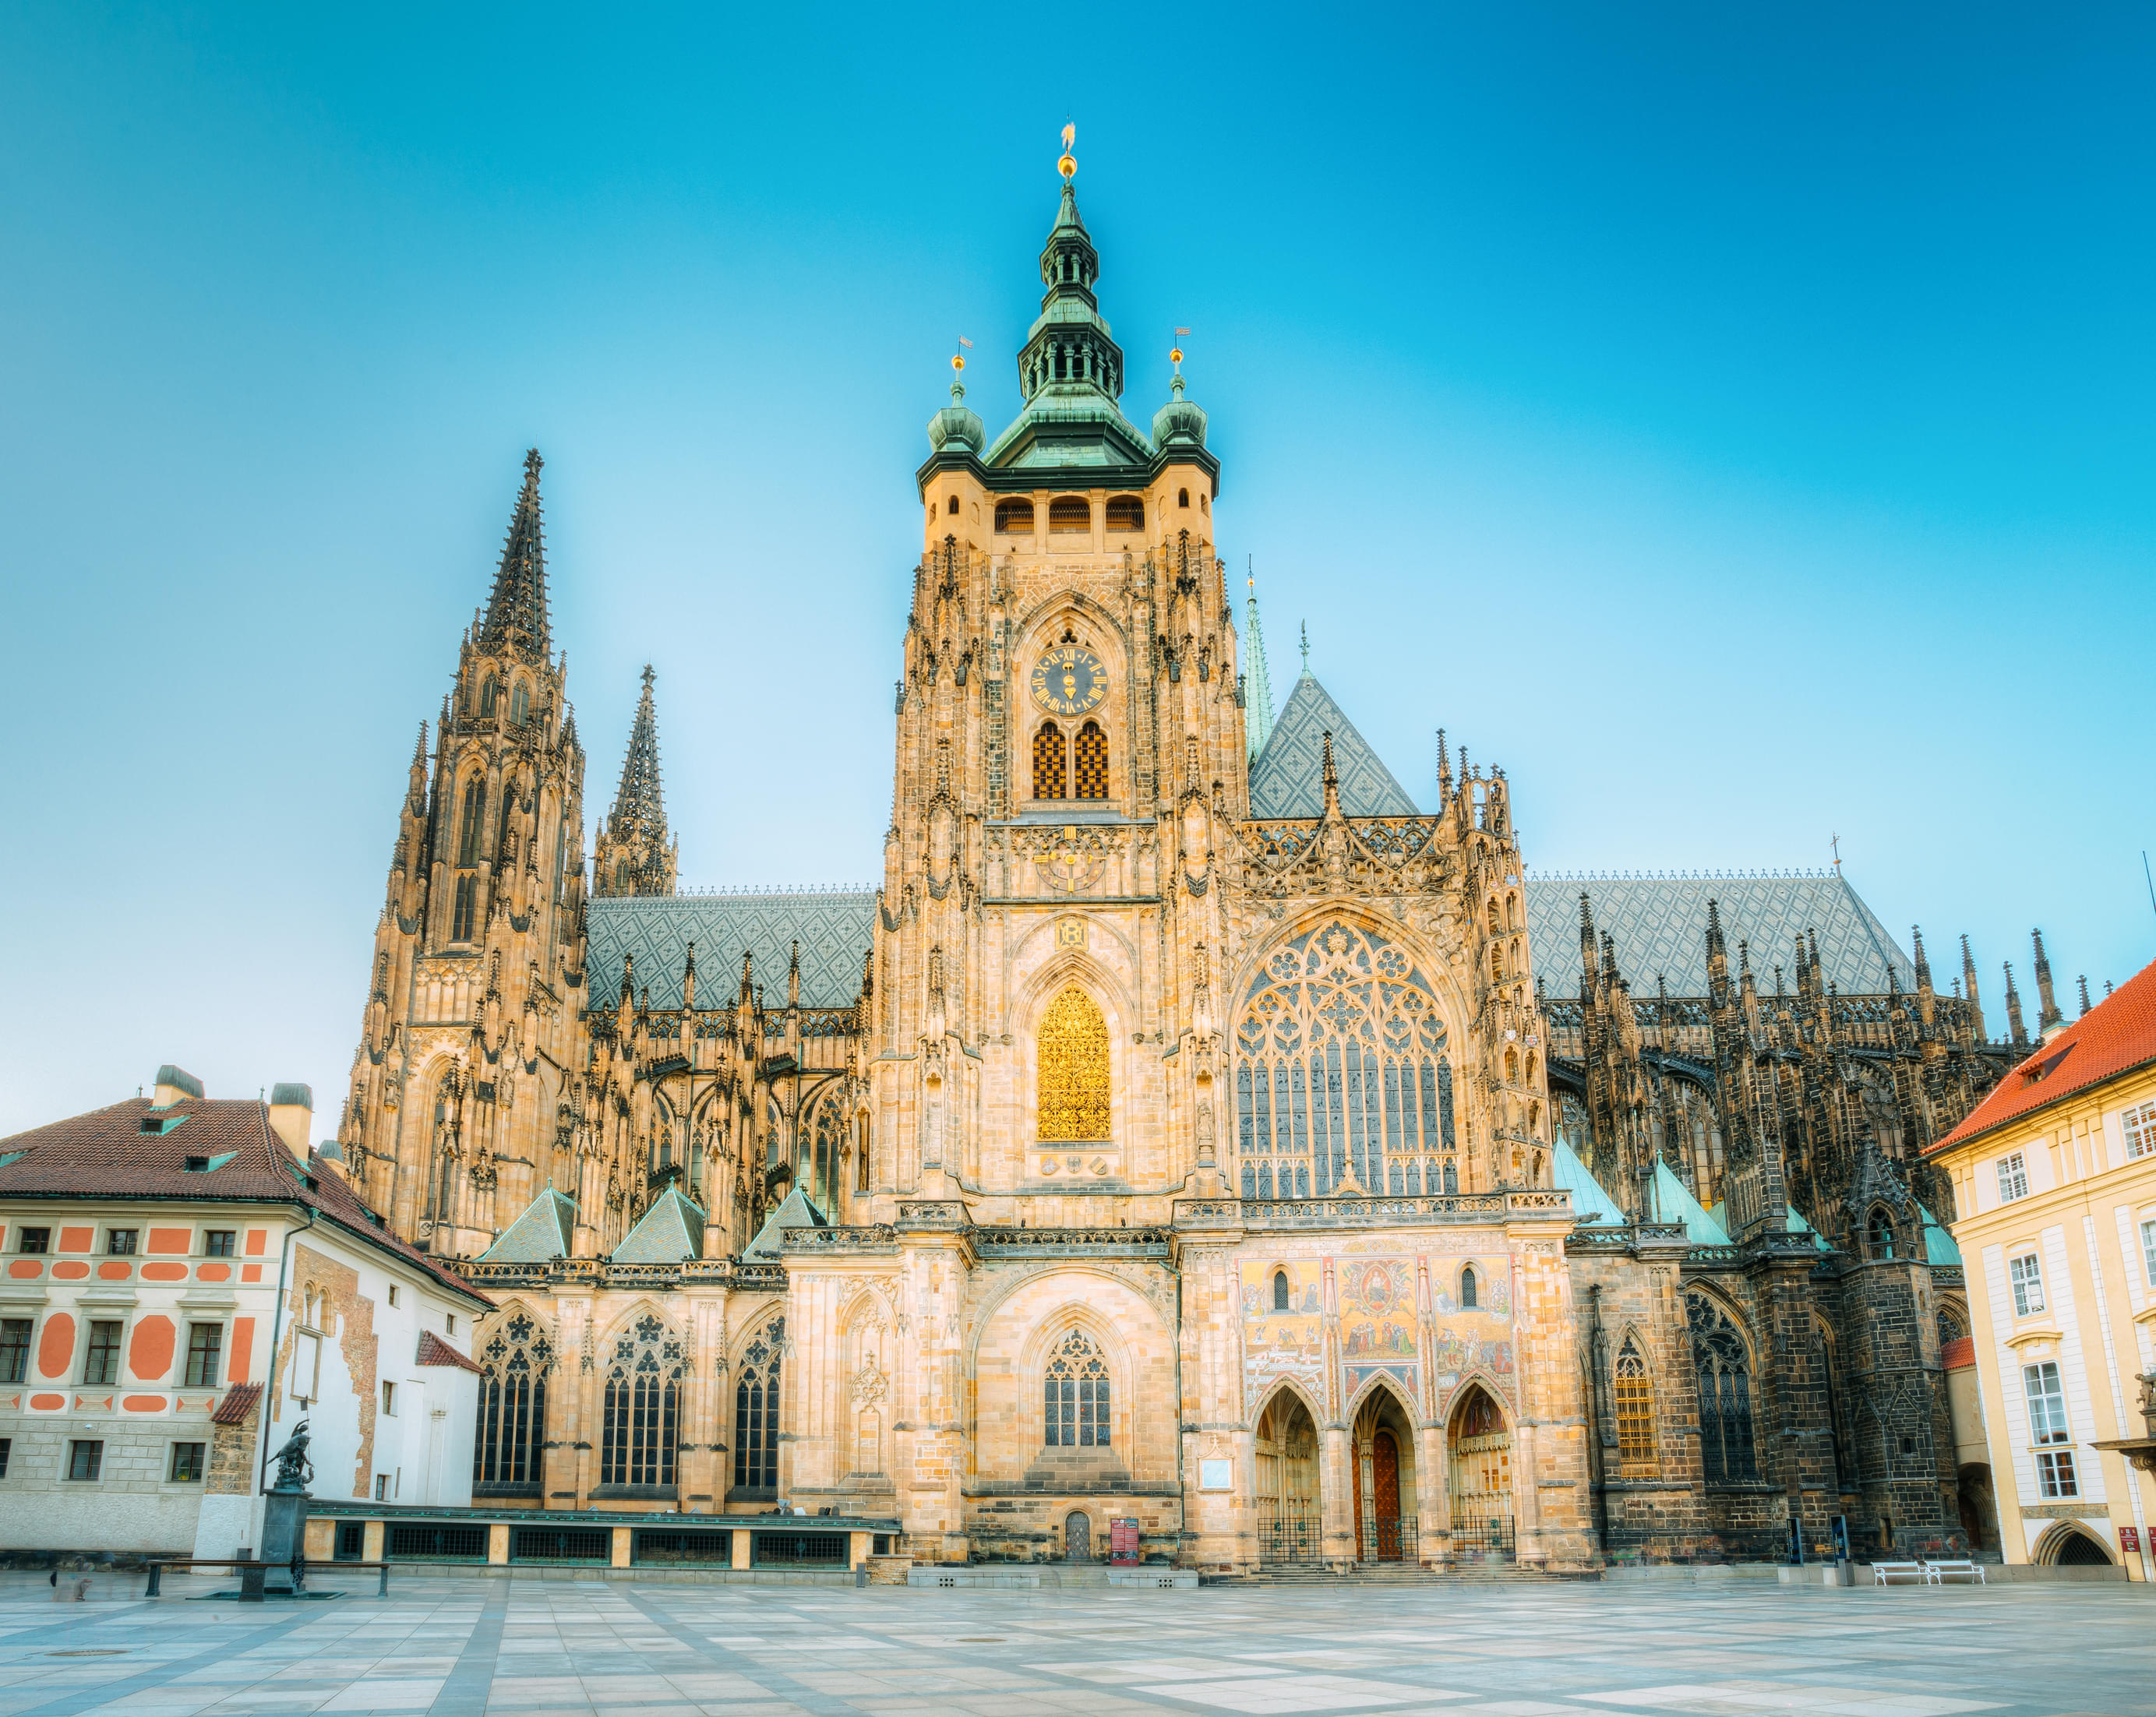 St. Vitus Cathedral Overview